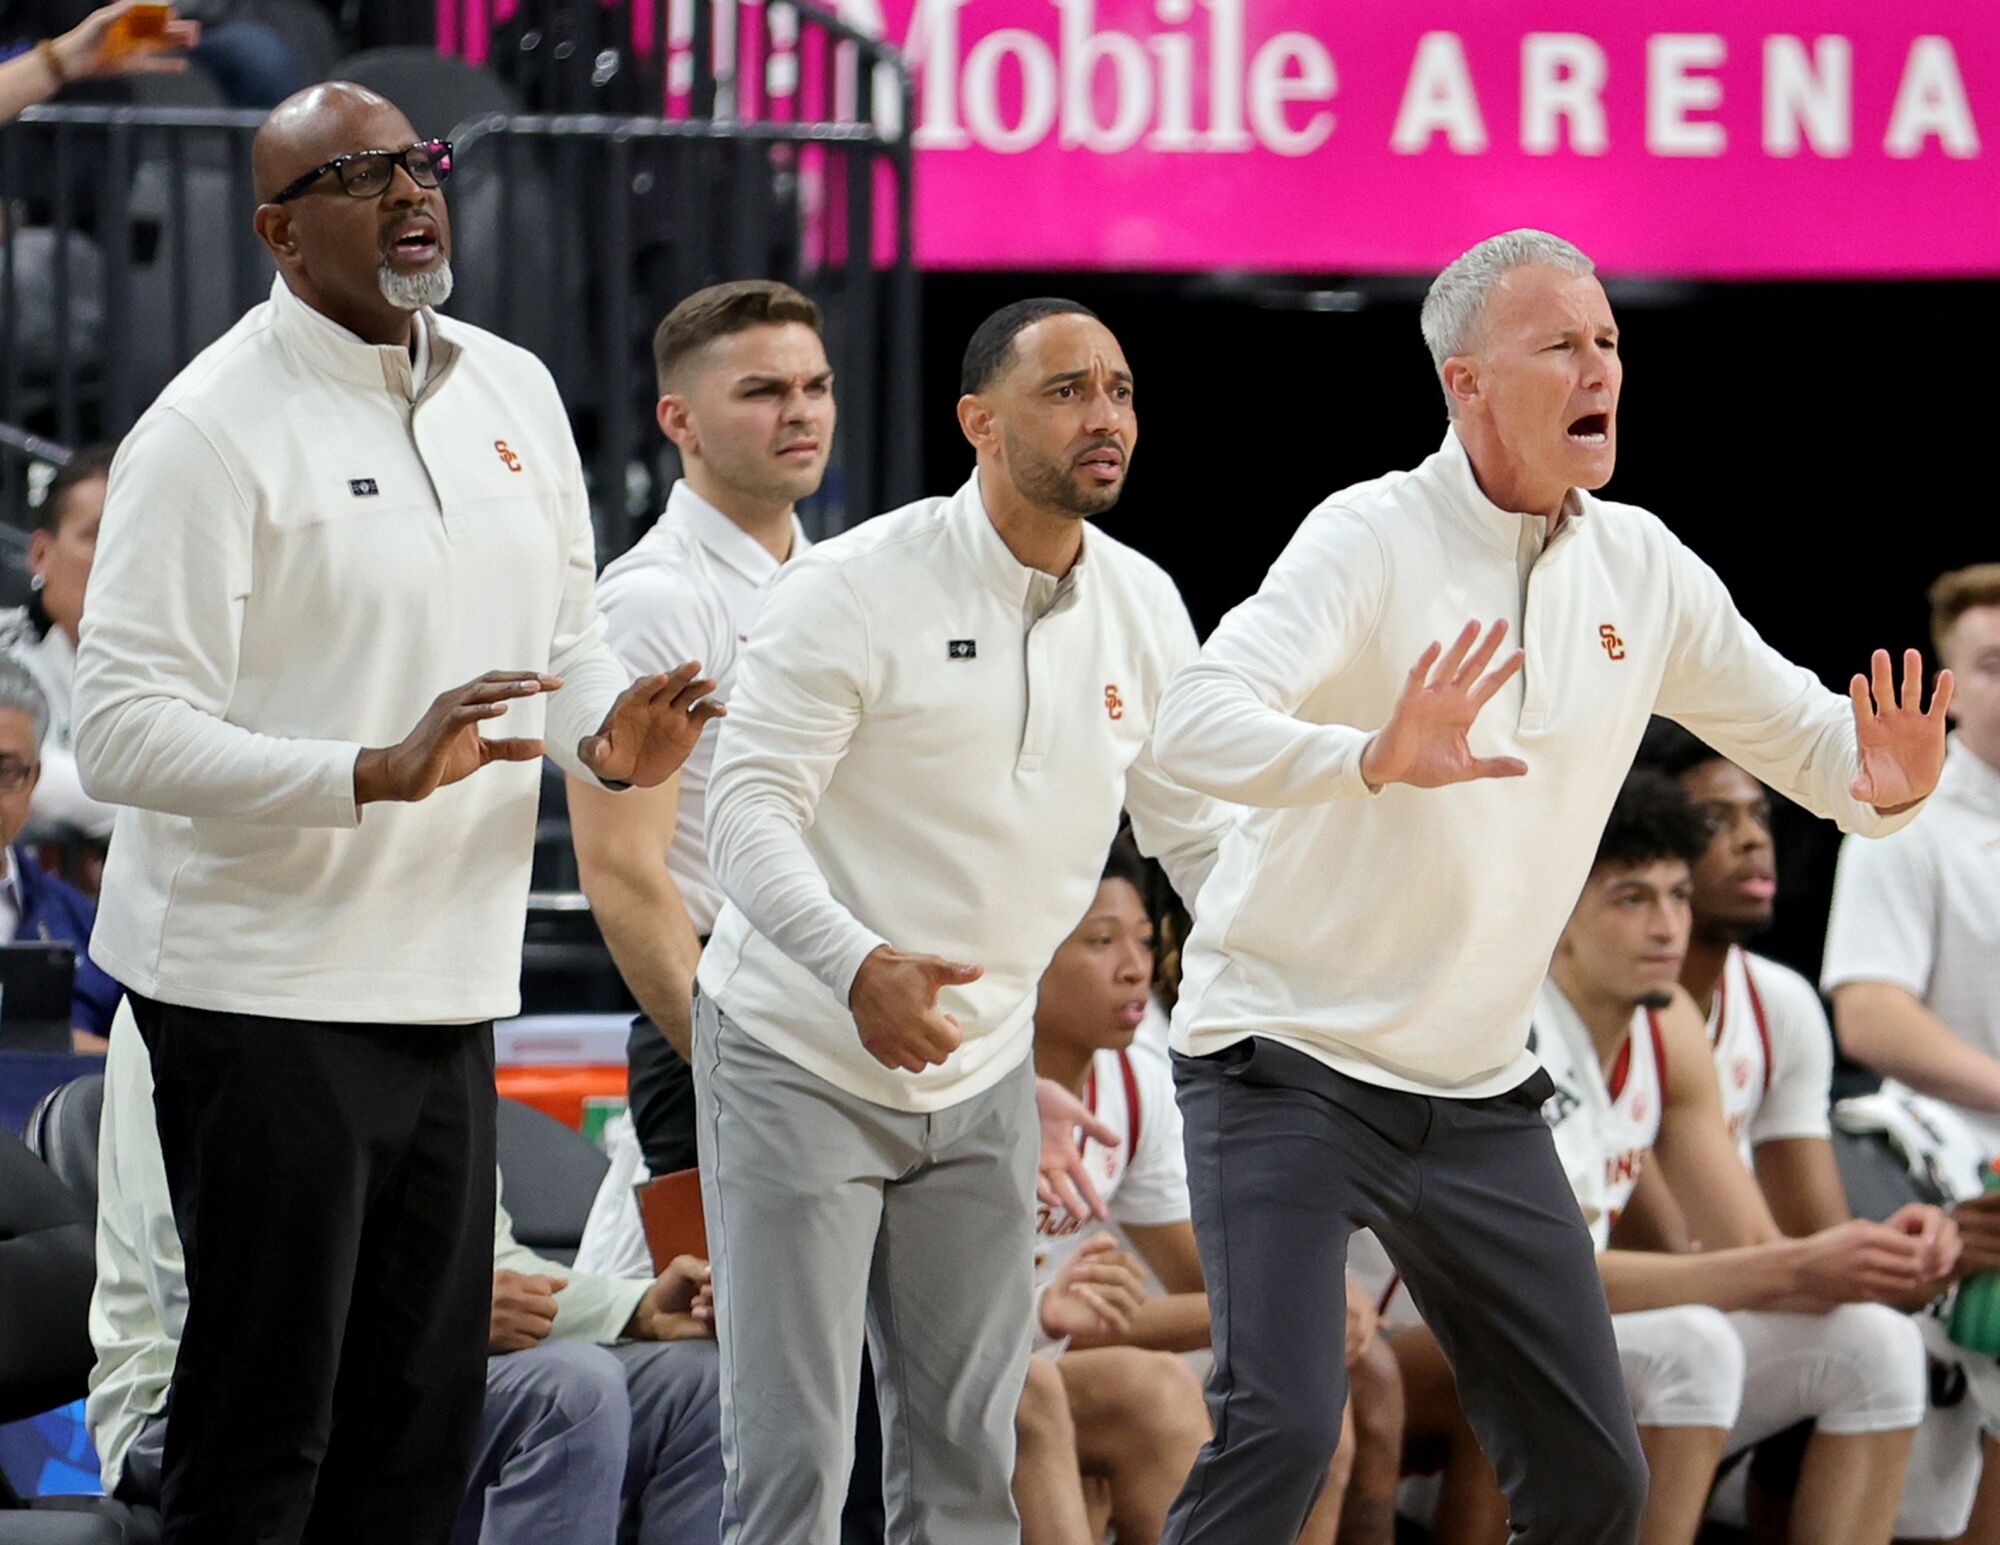 USC staff members Eric Mobley, Kurt Karis, Jay Morris and Andy Enfield react from the sideline